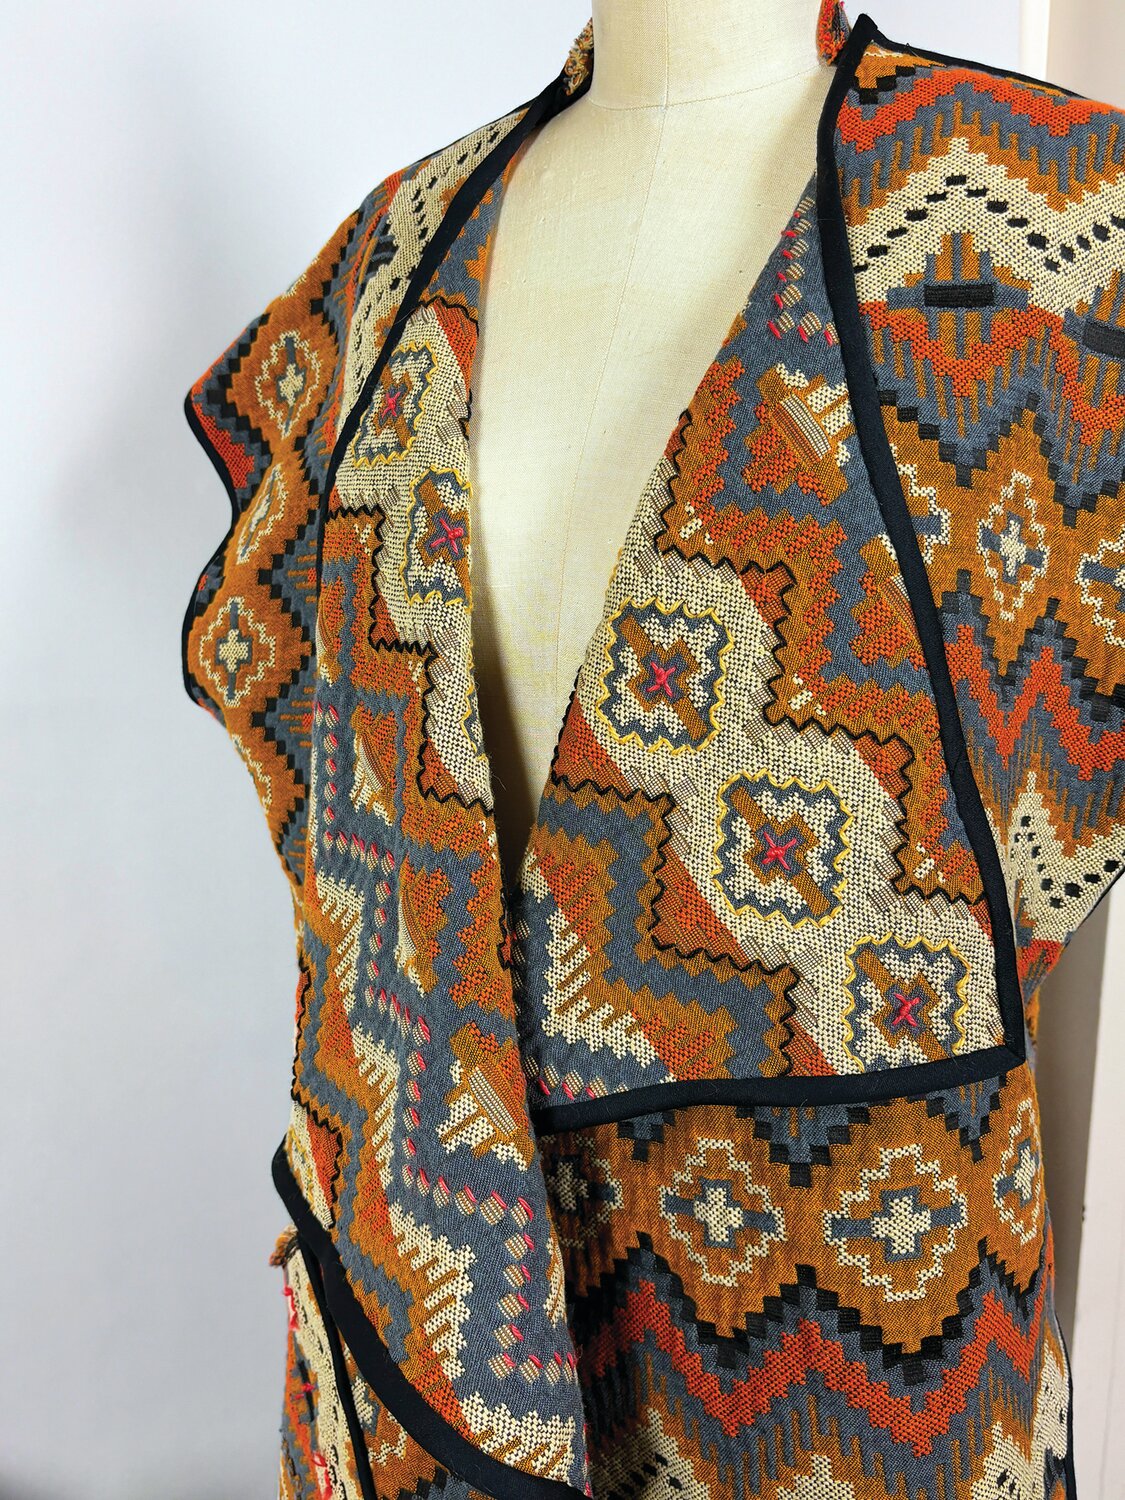 “Wander and Weave Vest” is a work of fabric with hand embroidery by Sarah Mueller, instructor of adult and youth fashion classes at The Baum School of Art.